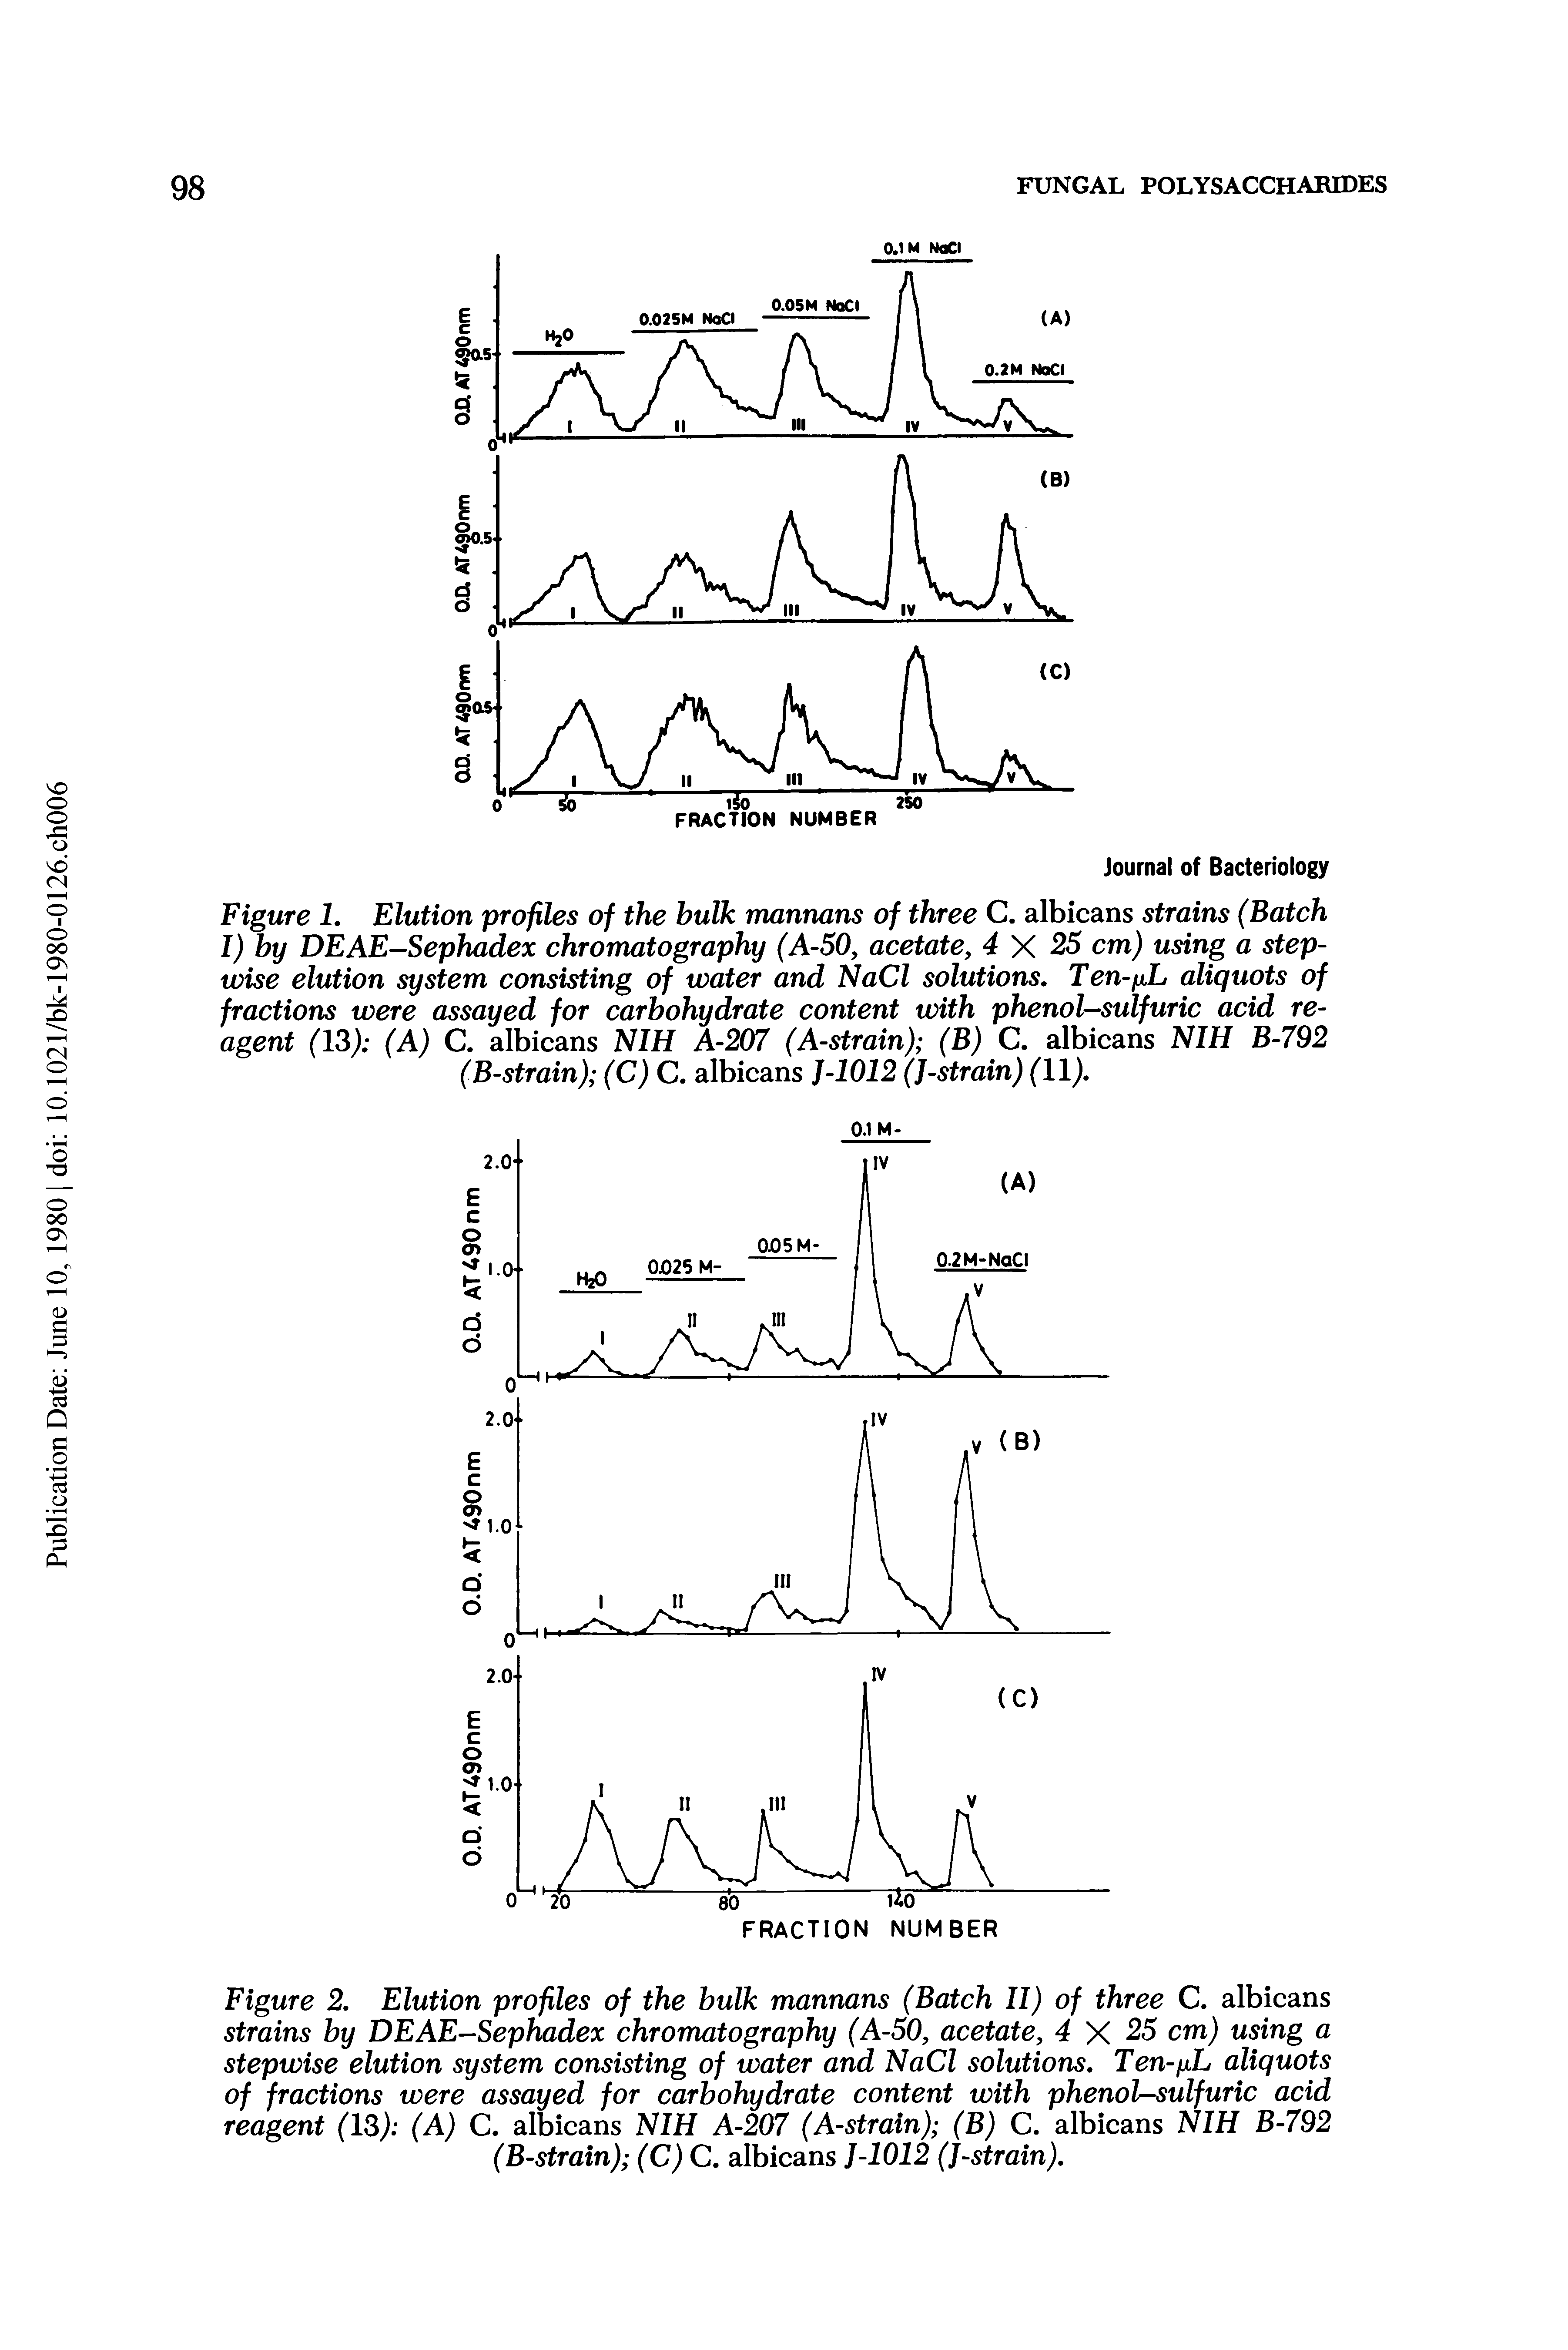 Figure L Elution profiles of the bulk mannans of three C. albicans strains (Batch I) by DEAE—Sephadex chromatography (A-50, acetate, 4 X 25 cm) using a stepwise elution system consisting of water and NaCl solutions, Ten-fxL aliquots of fractions were assayed for carbohydrate content with phenol-sulfuric acid reagent (13) (A) C. albicans NIH A-207 (A-strain) (B) C. albicans NIH B-792 (B-strain) (C) C. albicans J-1012 (J-strain) (11),...